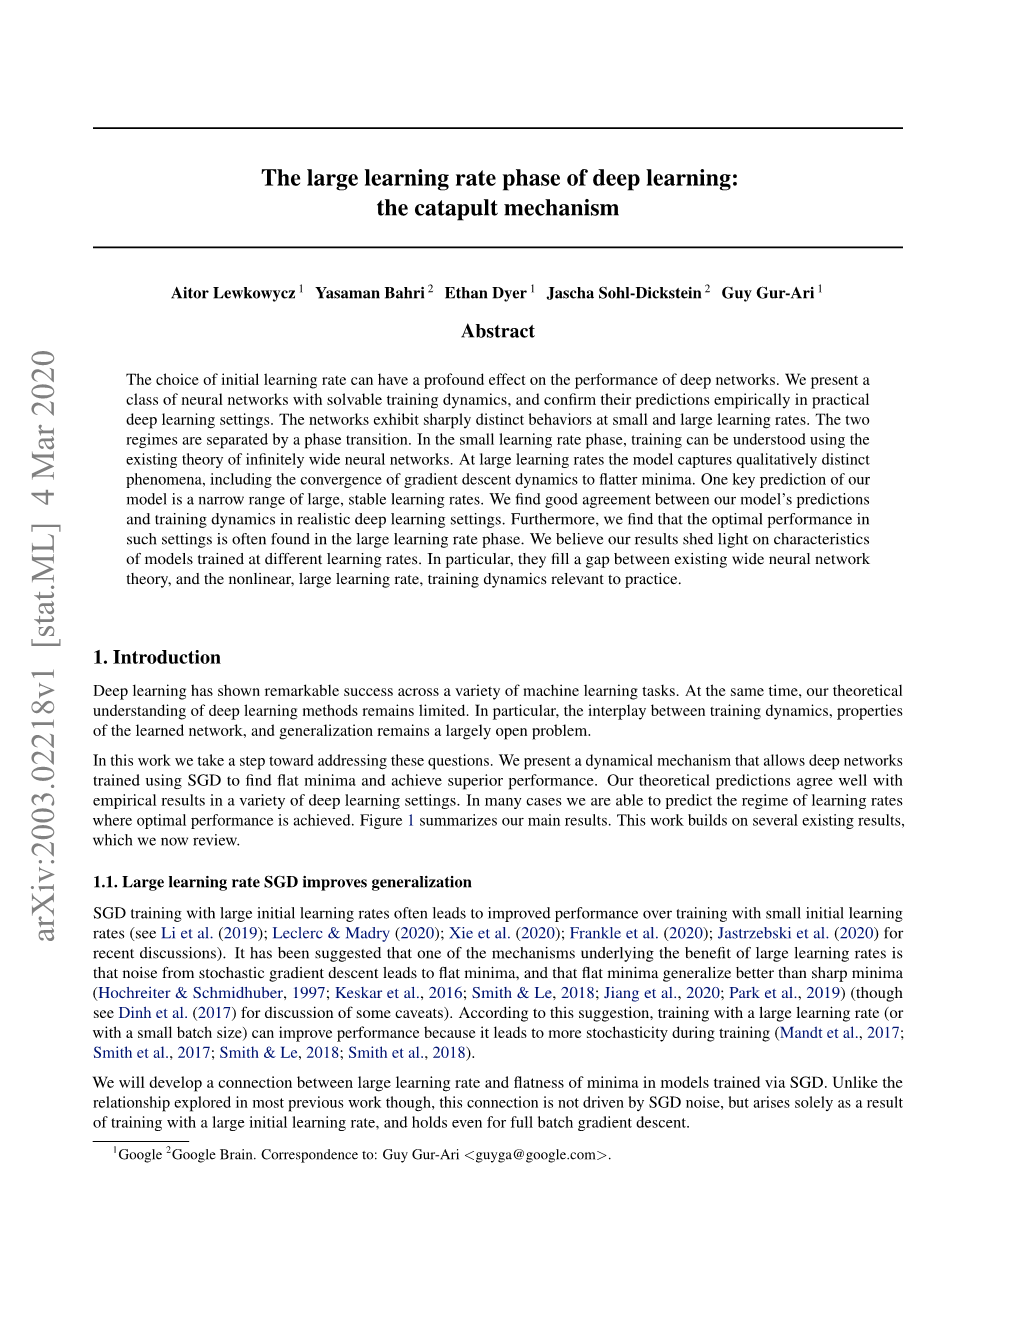 The Large Learning Rate Phase of Deep Learning: the Catapult Mechanism